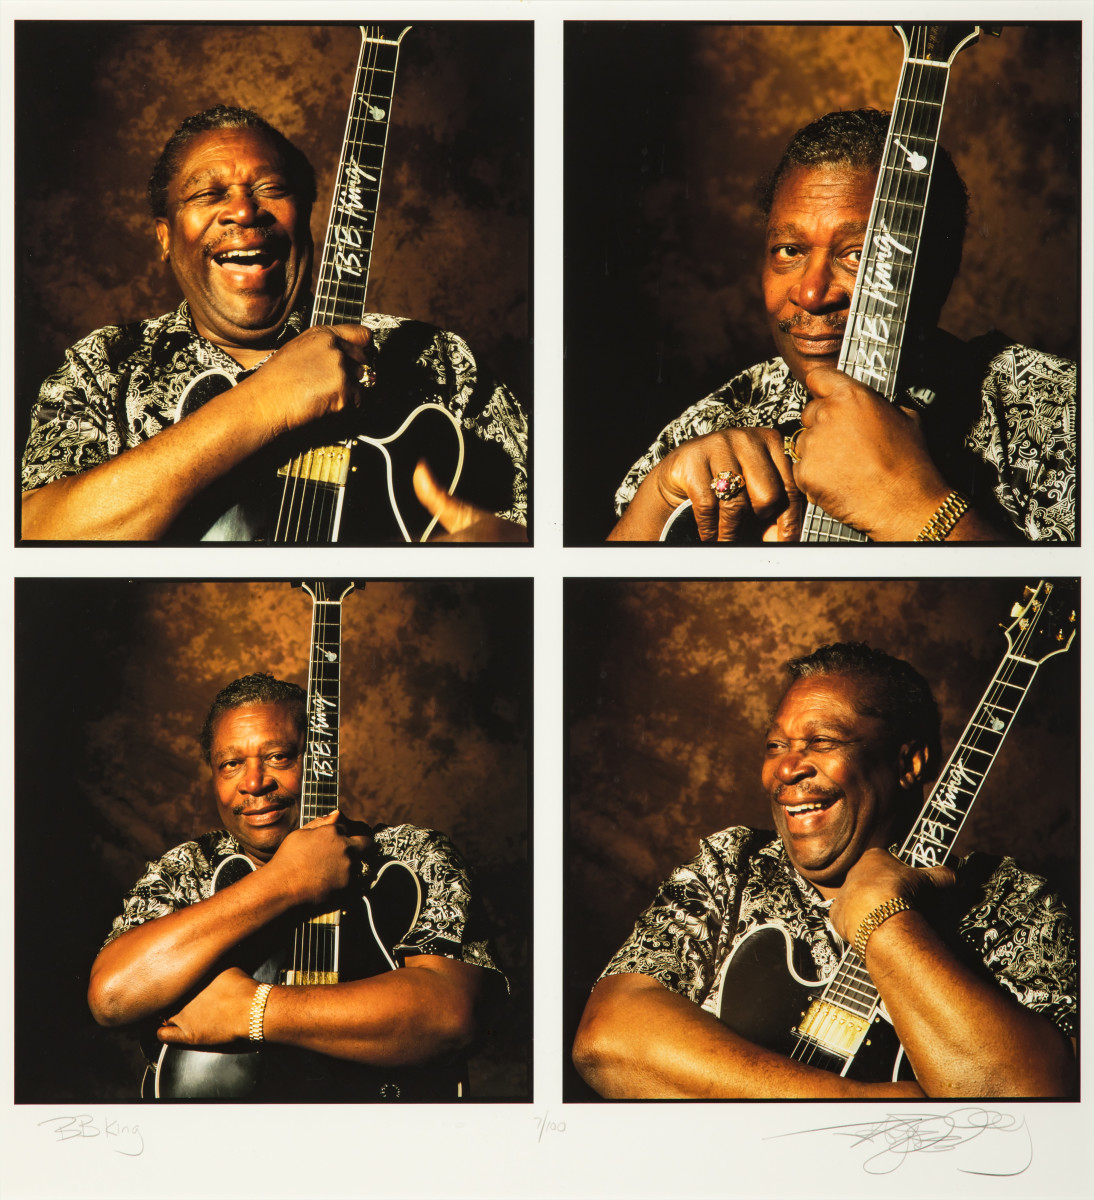 B.B. King with Lucille by Jay Blakesberg 